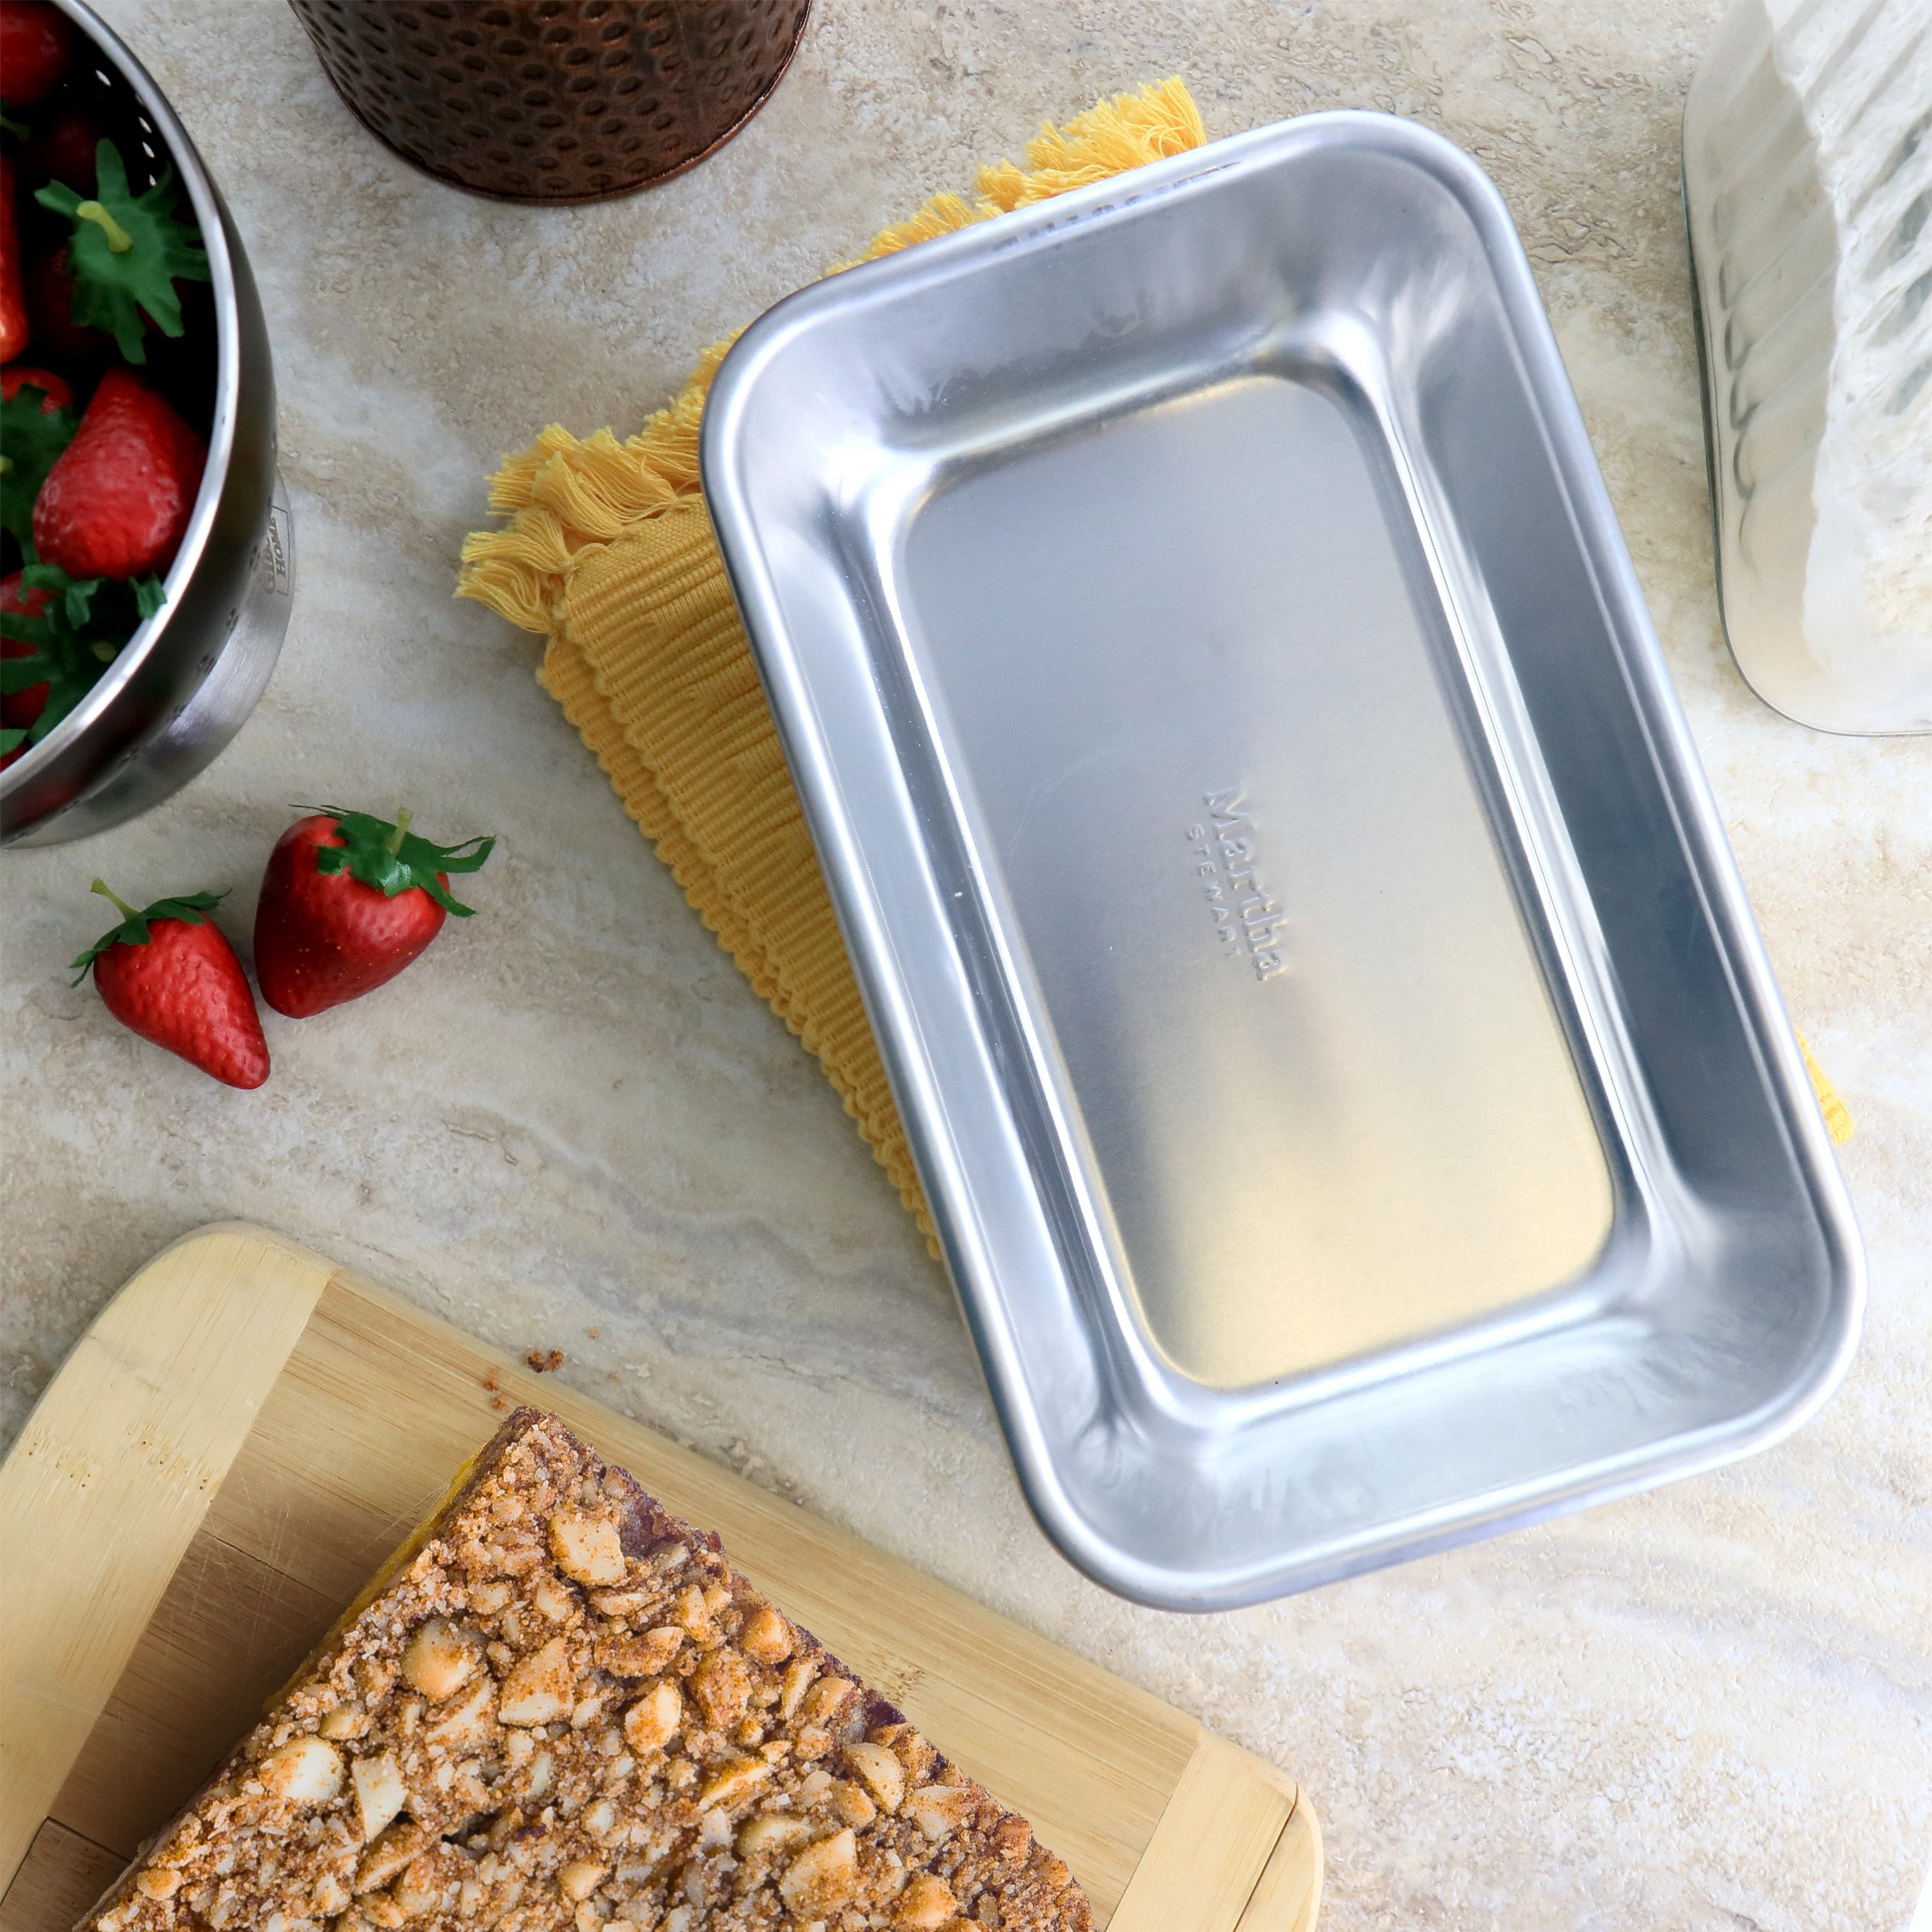 https://ak1.ostkcdn.com/images/products/is/images/direct/7f0c64c54a4ef1798abc5783f48b499189f8ec8c/Martha-Stewart-9-Inch-Aluminum-Rectangle-Loaf-Pan.jpg